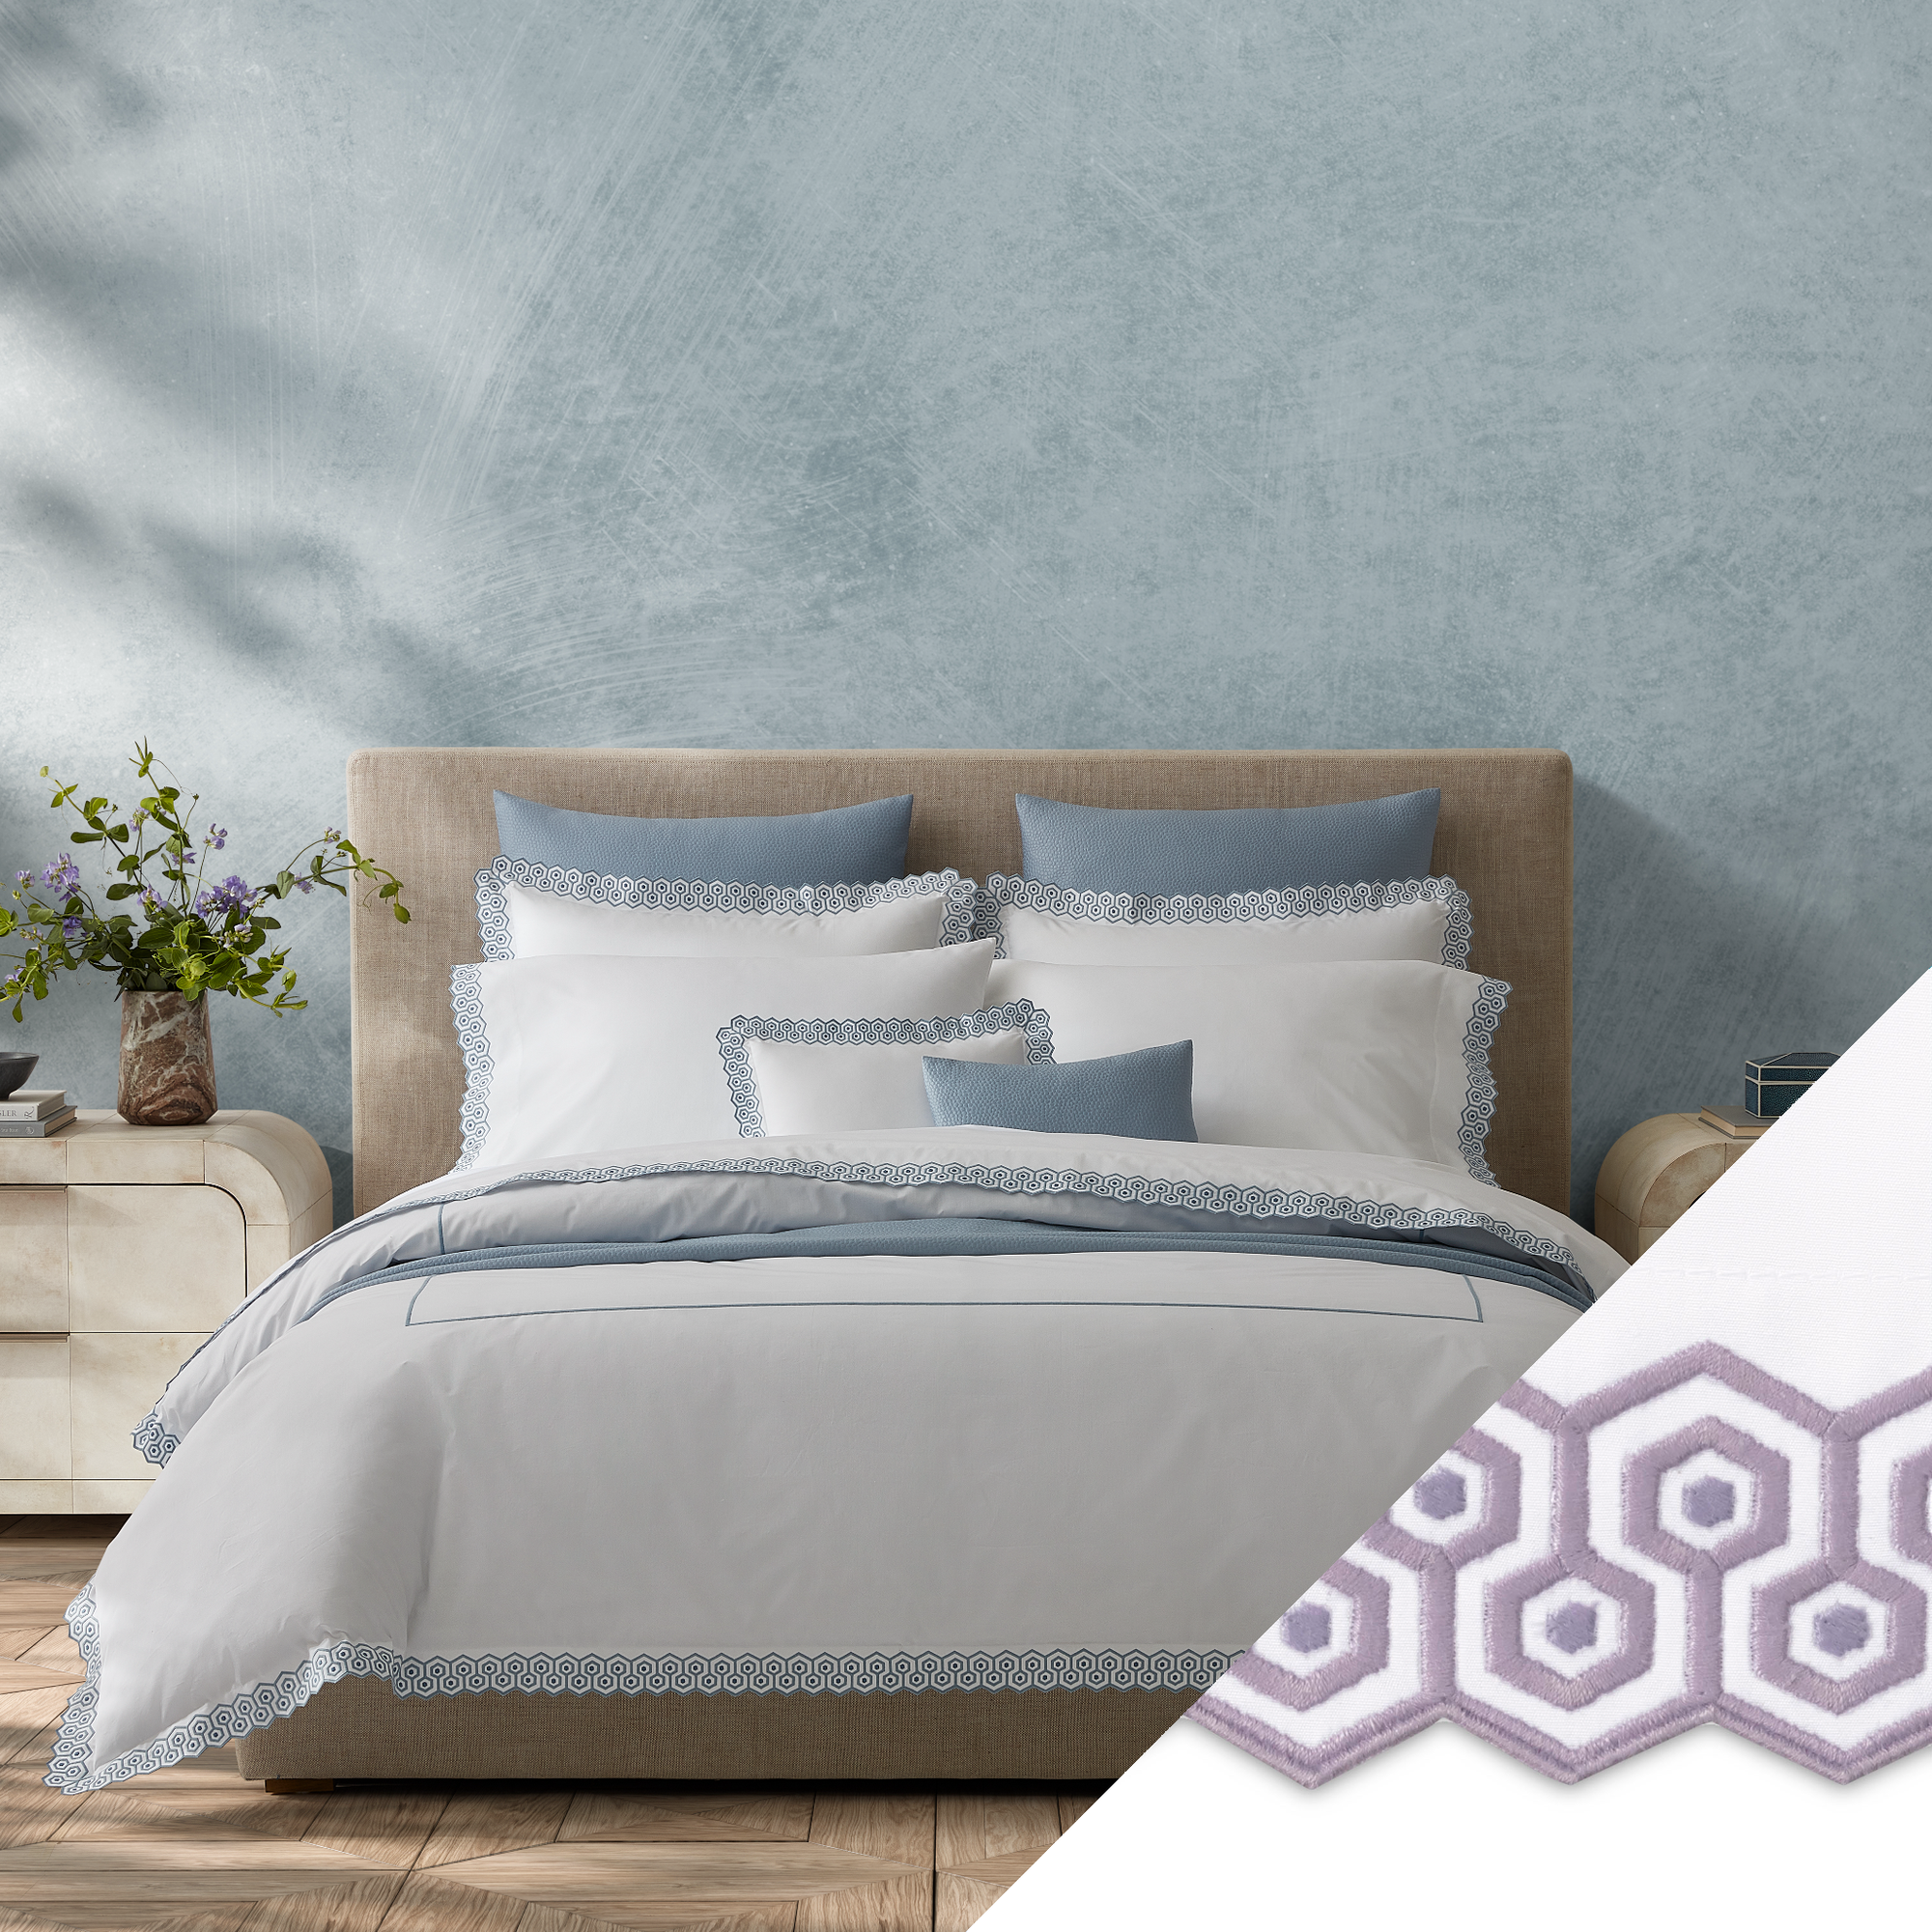 Full Bed Dressed in Matouk Felix Bedding in Hazy Blue Color with Lilac  Swatch